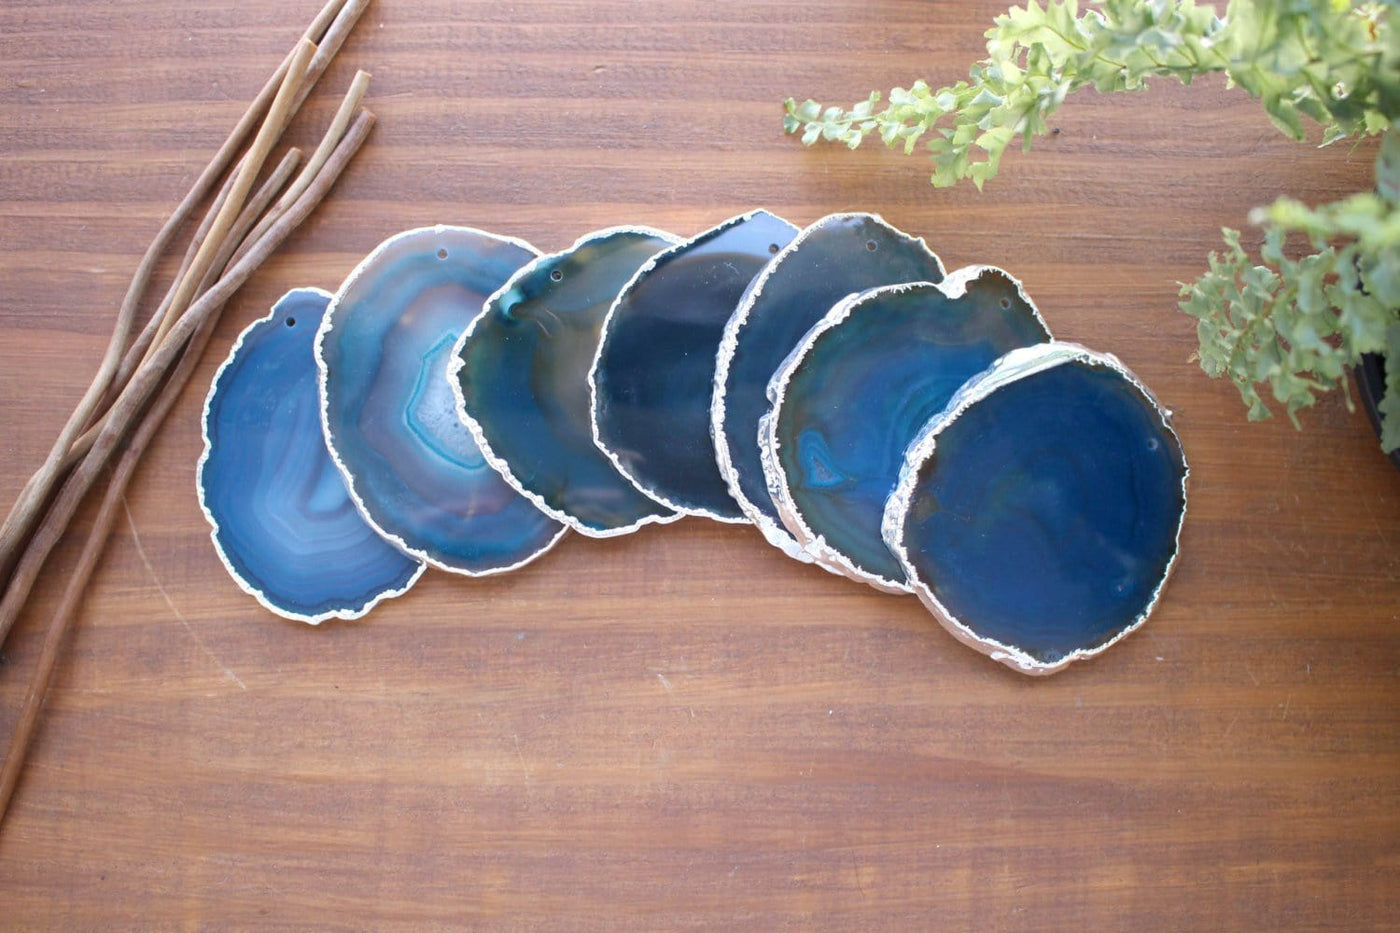 7 silver electroplated Teal Top Drilled Agate Slices layered on a table . Those agate slices measure between 3-3.5" in diameter. and have an average weight of 0.15 lb